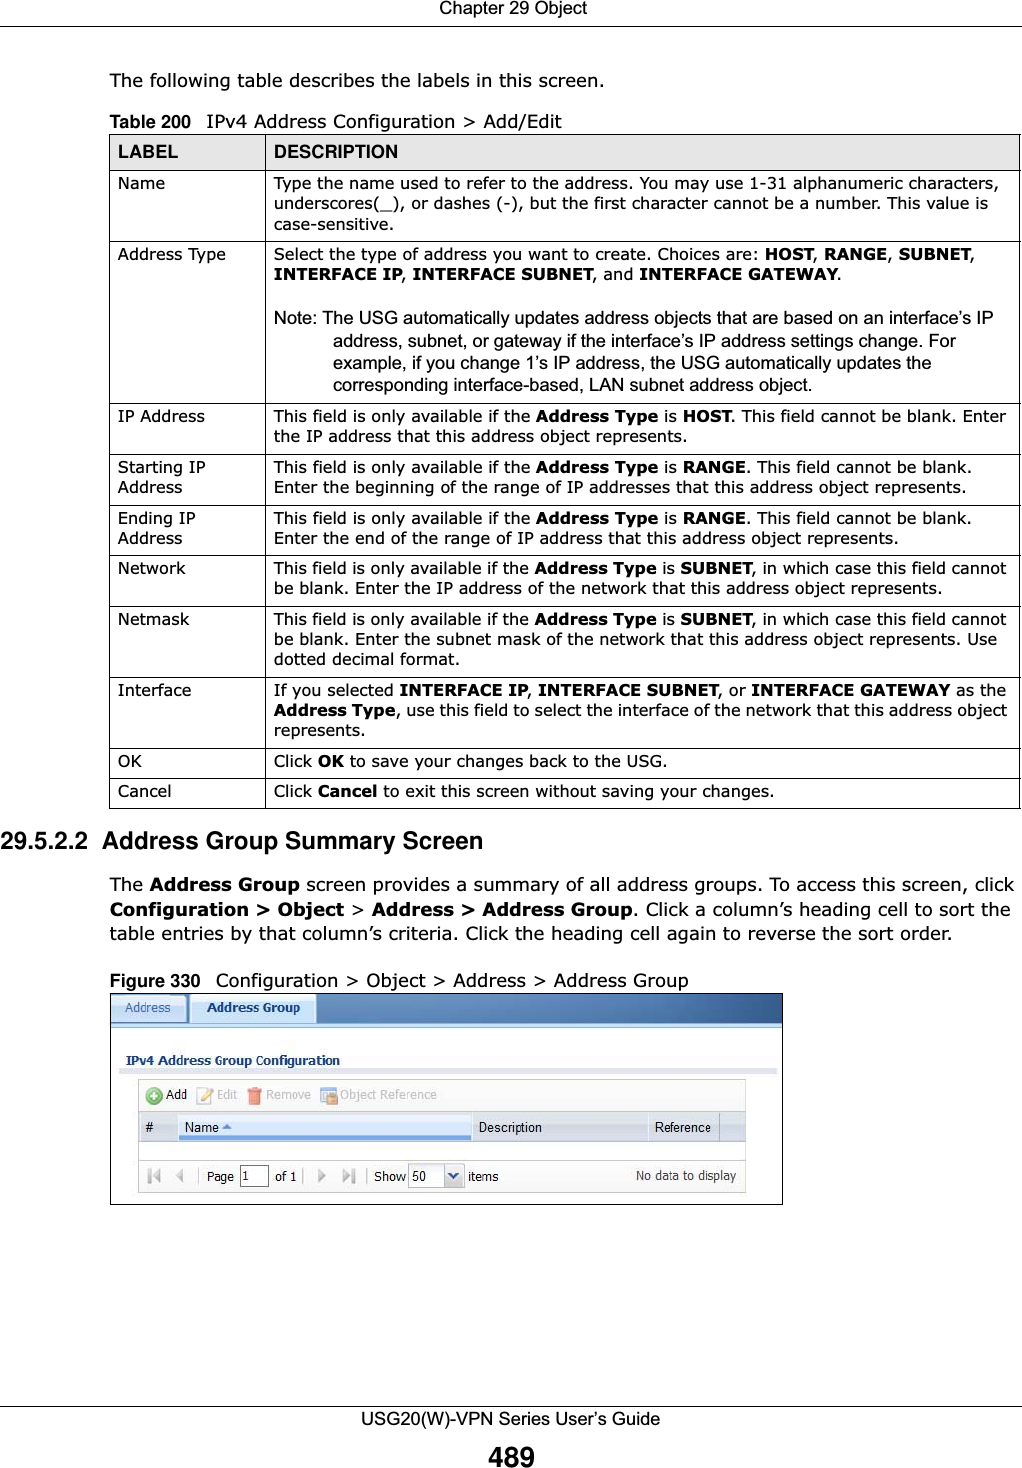  Chapter 29 ObjectUSG20(W)-VPN Series User’s Guide489The following table describes the labels in this screen.   29.5.2.2  Address Group Summary ScreenThe Address Group screen provides a summary of all address groups. To access this screen, click Configuration &gt; Object &gt; Address &gt; Address Group. Click a column’s heading cell to sort the table entries by that column’s criteria. Click the heading cell again to reverse the sort order.Figure 330   Configuration &gt; Object &gt; Address &gt; Address GroupTable 200   IPv4 Address Configuration &gt; Add/EditLABEL DESCRIPTIONName Type the name used to refer to the address. You may use 1-31 alphanumeric characters, underscores(_), or dashes (-), but the first character cannot be a number. This value is case-sensitive.Address Type Select the type of address you want to create. Choices are: HOST, RANGE, SUBNET, INTERFACE IP, INTERFACE SUBNET, and INTERFACE GATEWAY.Note: The USG automatically updates address objects that are based on an interface’s IP address, subnet, or gateway if the interface’s IP address settings change. For example, if you change 1’s IP address, the USG automatically updates the corresponding interface-based, LAN subnet address object.IP Address This field is only available if the Address Type is HOST. This field cannot be blank. Enter the IP address that this address object represents.Starting IP AddressThis field is only available if the Address Type is RANGE. This field cannot be blank. Enter the beginning of the range of IP addresses that this address object represents.Ending IP AddressThis field is only available if the Address Type is RANGE. This field cannot be blank. Enter the end of the range of IP address that this address object represents.Network This field is only available if the Address Type is SUBNET, in which case this field cannot be blank. Enter the IP address of the network that this address object represents.Netmask This field is only available if the Address Type is SUBNET, in which case this field cannot be blank. Enter the subnet mask of the network that this address object represents. Use dotted decimal format.Interface If you selected INTERFACE IP, INTERFACE SUBNET, or INTERFACE GATEWAY as theAddress Type, use this field to select the interface of the network that this address object represents.OK Click OK to save your changes back to the USG.Cancel Click Cancel to exit this screen without saving your changes.